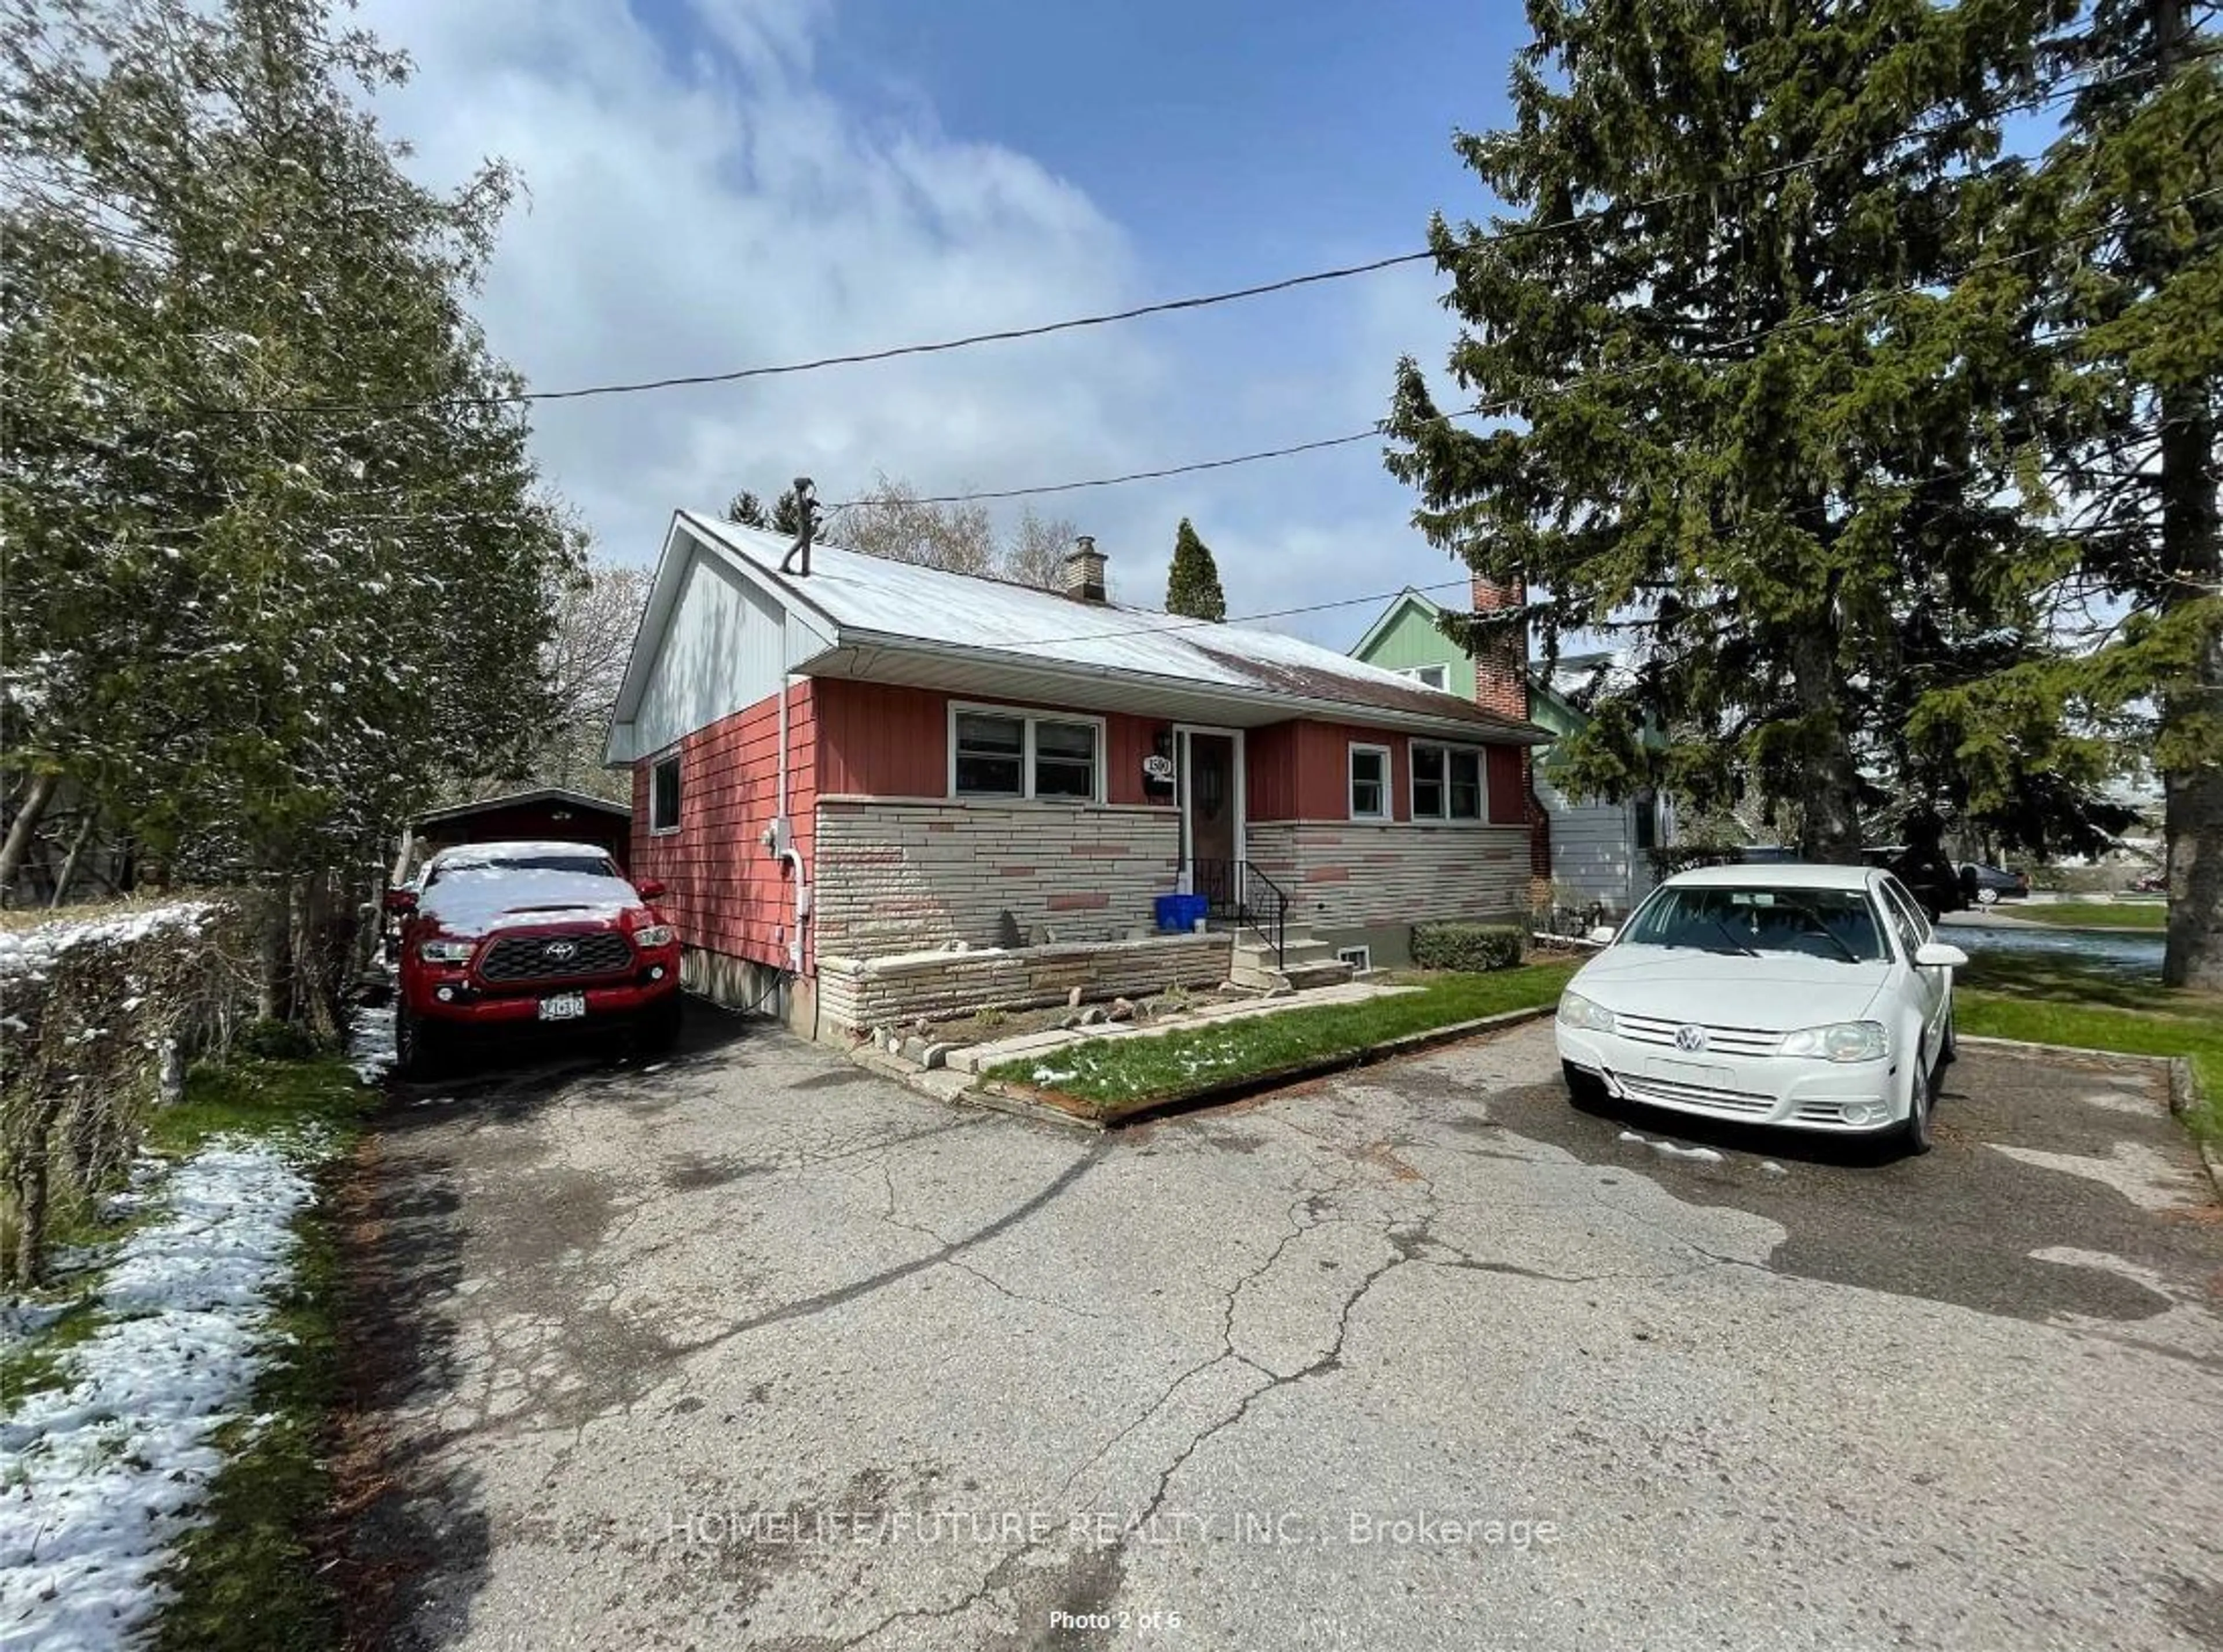 Frontside or backside of a home for 1500 Simcoe St, Oshawa Ontario L1G 4X7